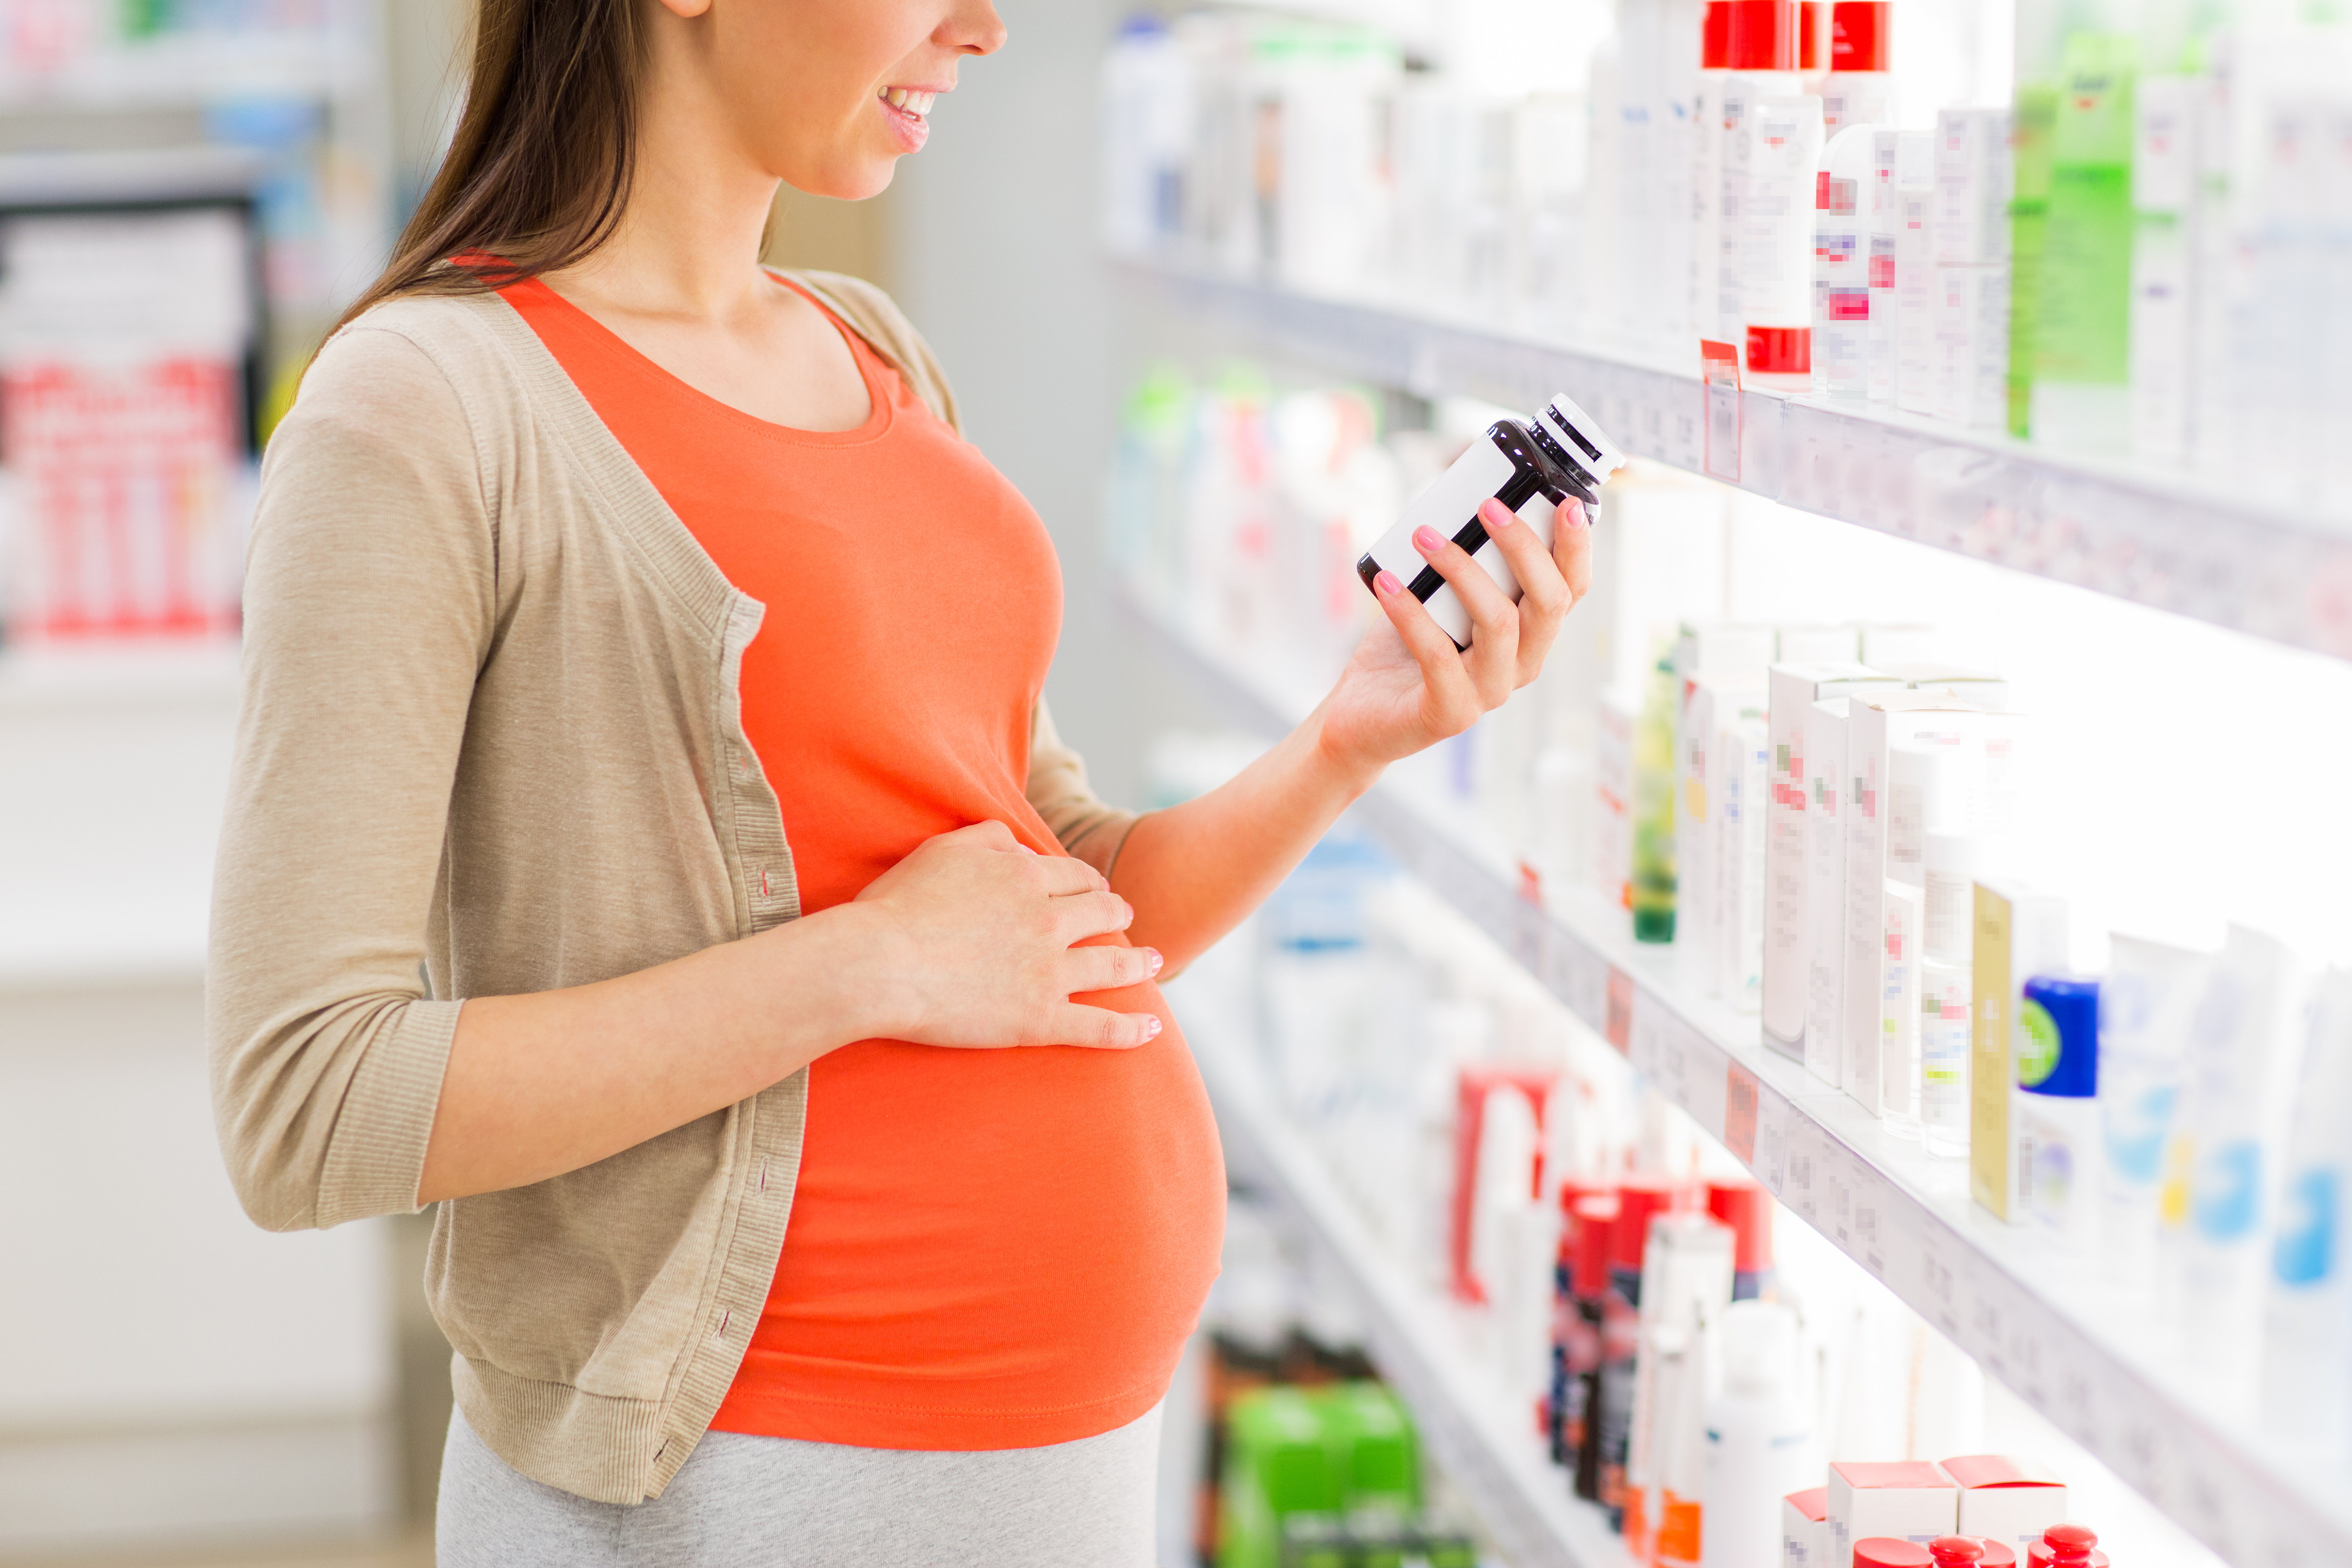 While prenatal vitamins are a healthy regimen during pregnancy to ensure th...